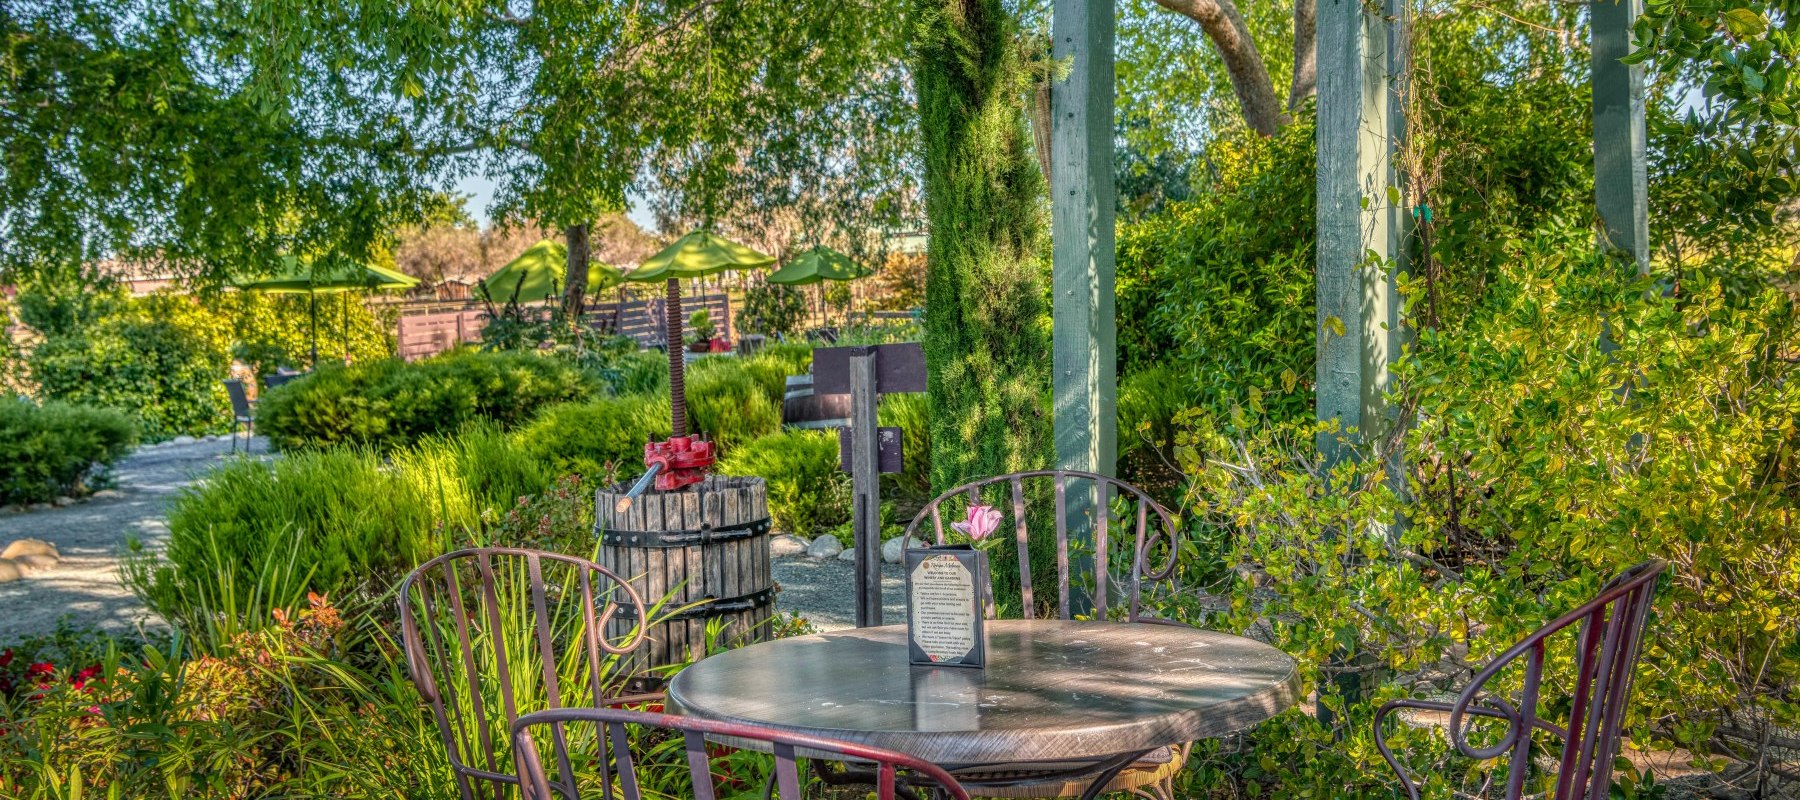 A table with four chairs in the RM wine tasting garden surrounded by green shrubs, trees, a trellis in the background and an old wooden wine press with a red handle